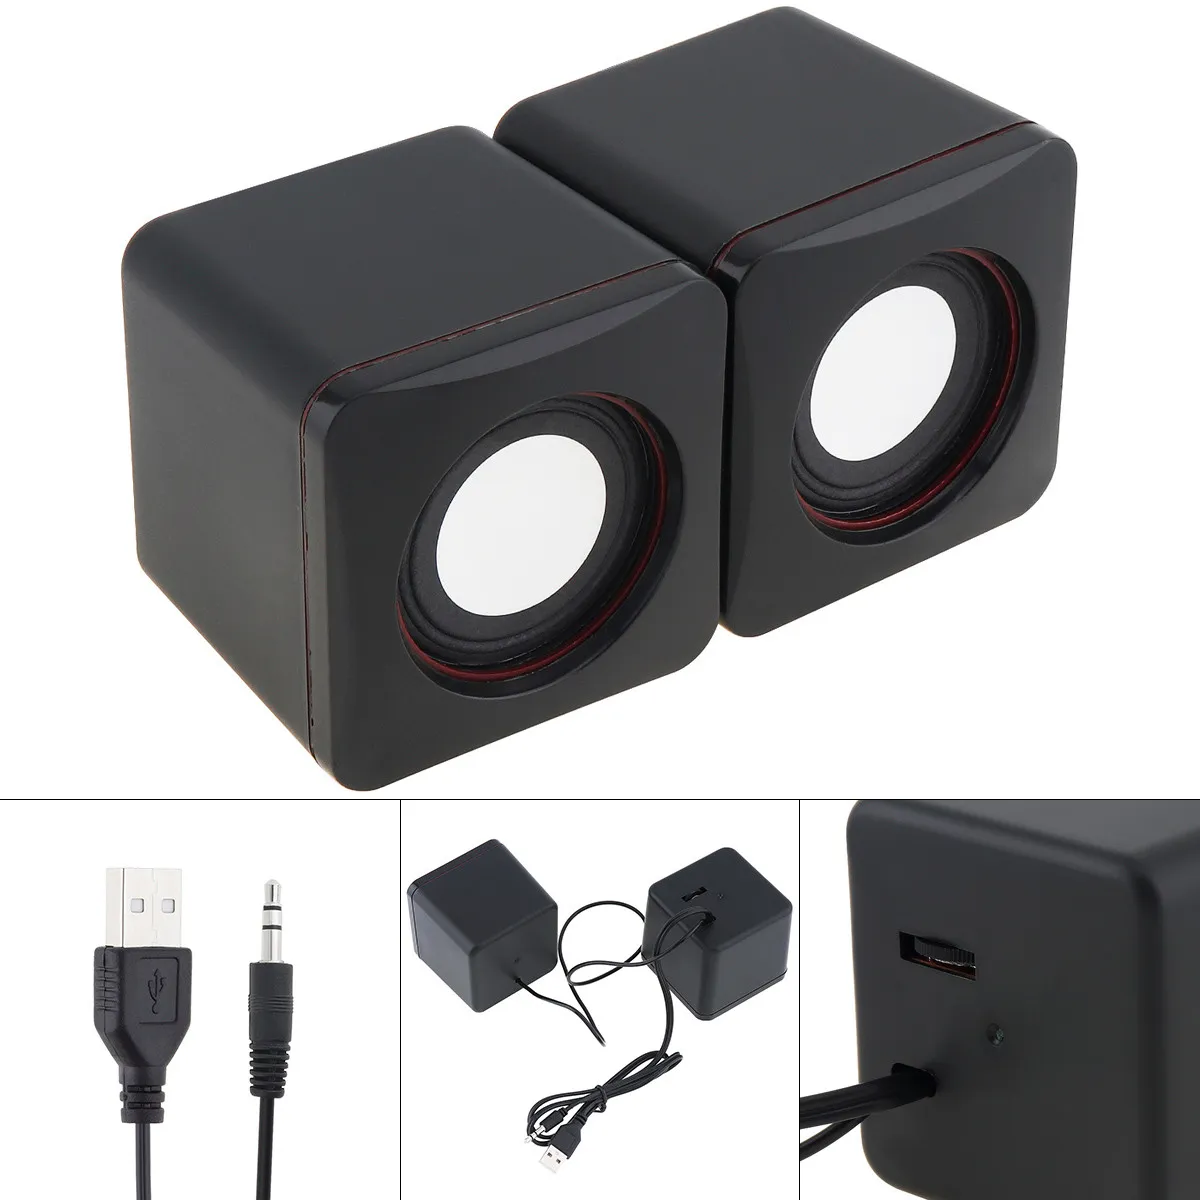 4W USB 2.0 Mini Portable Speakers Computer Soundbox with 3.5mm Stereo Jack and USB Powered for PC Laptop Smartphone